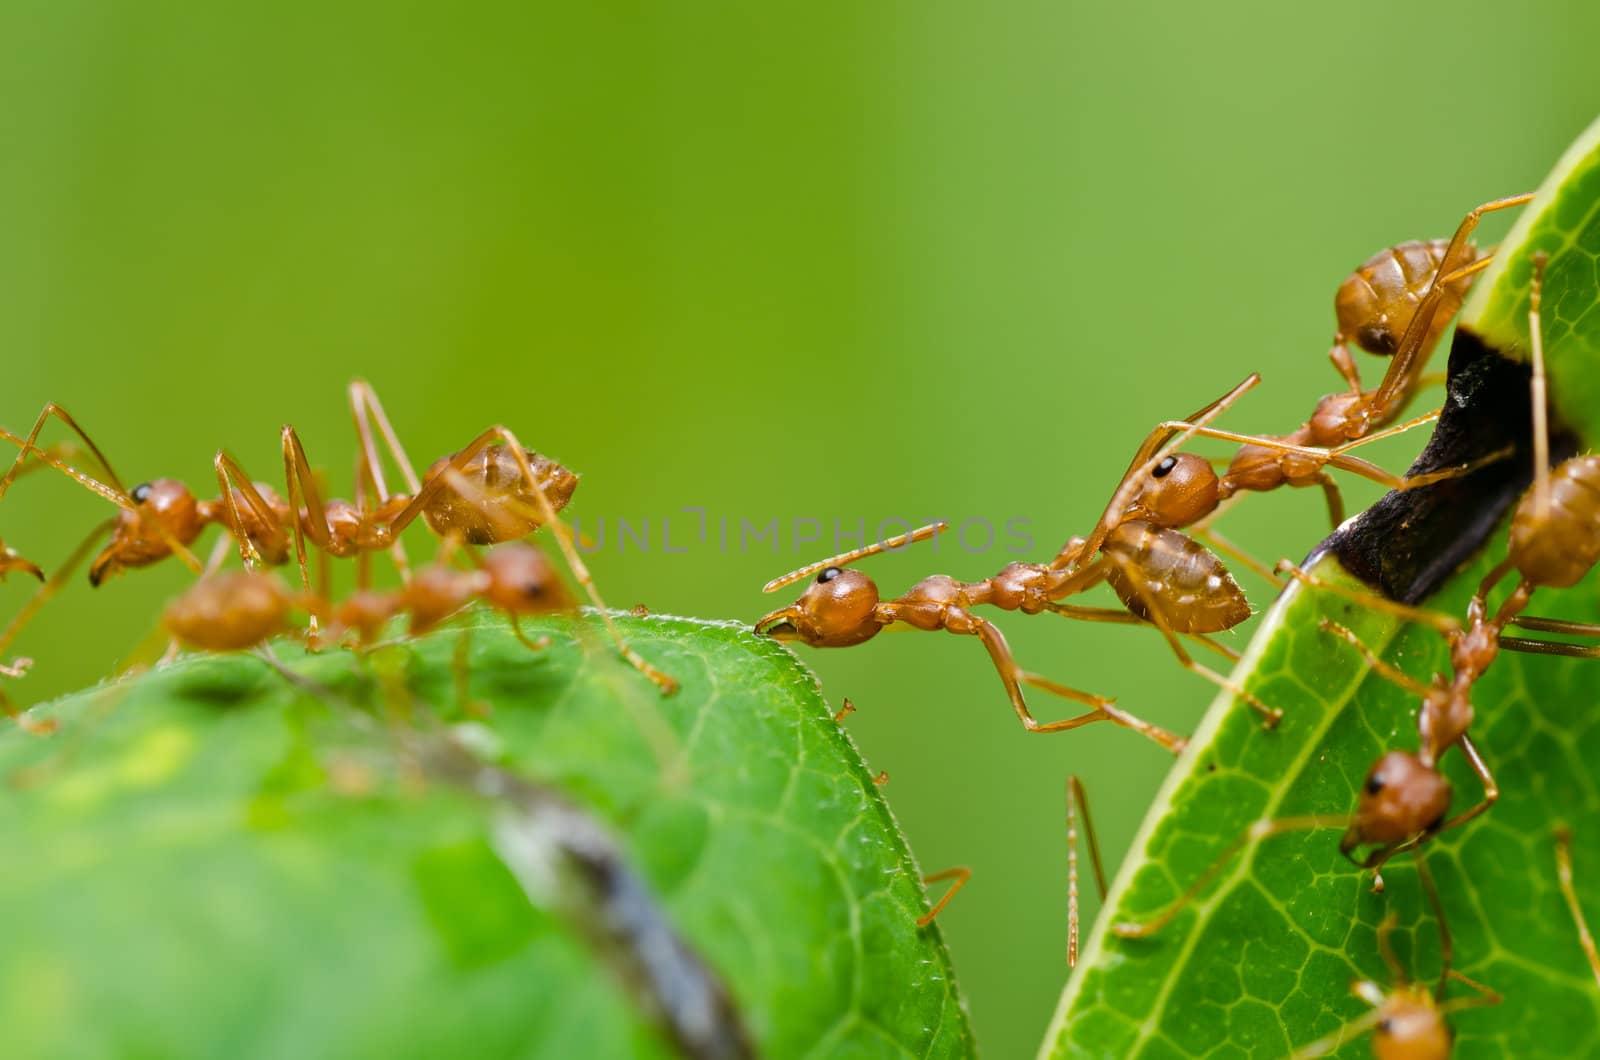 red ant in green nature or in the garden